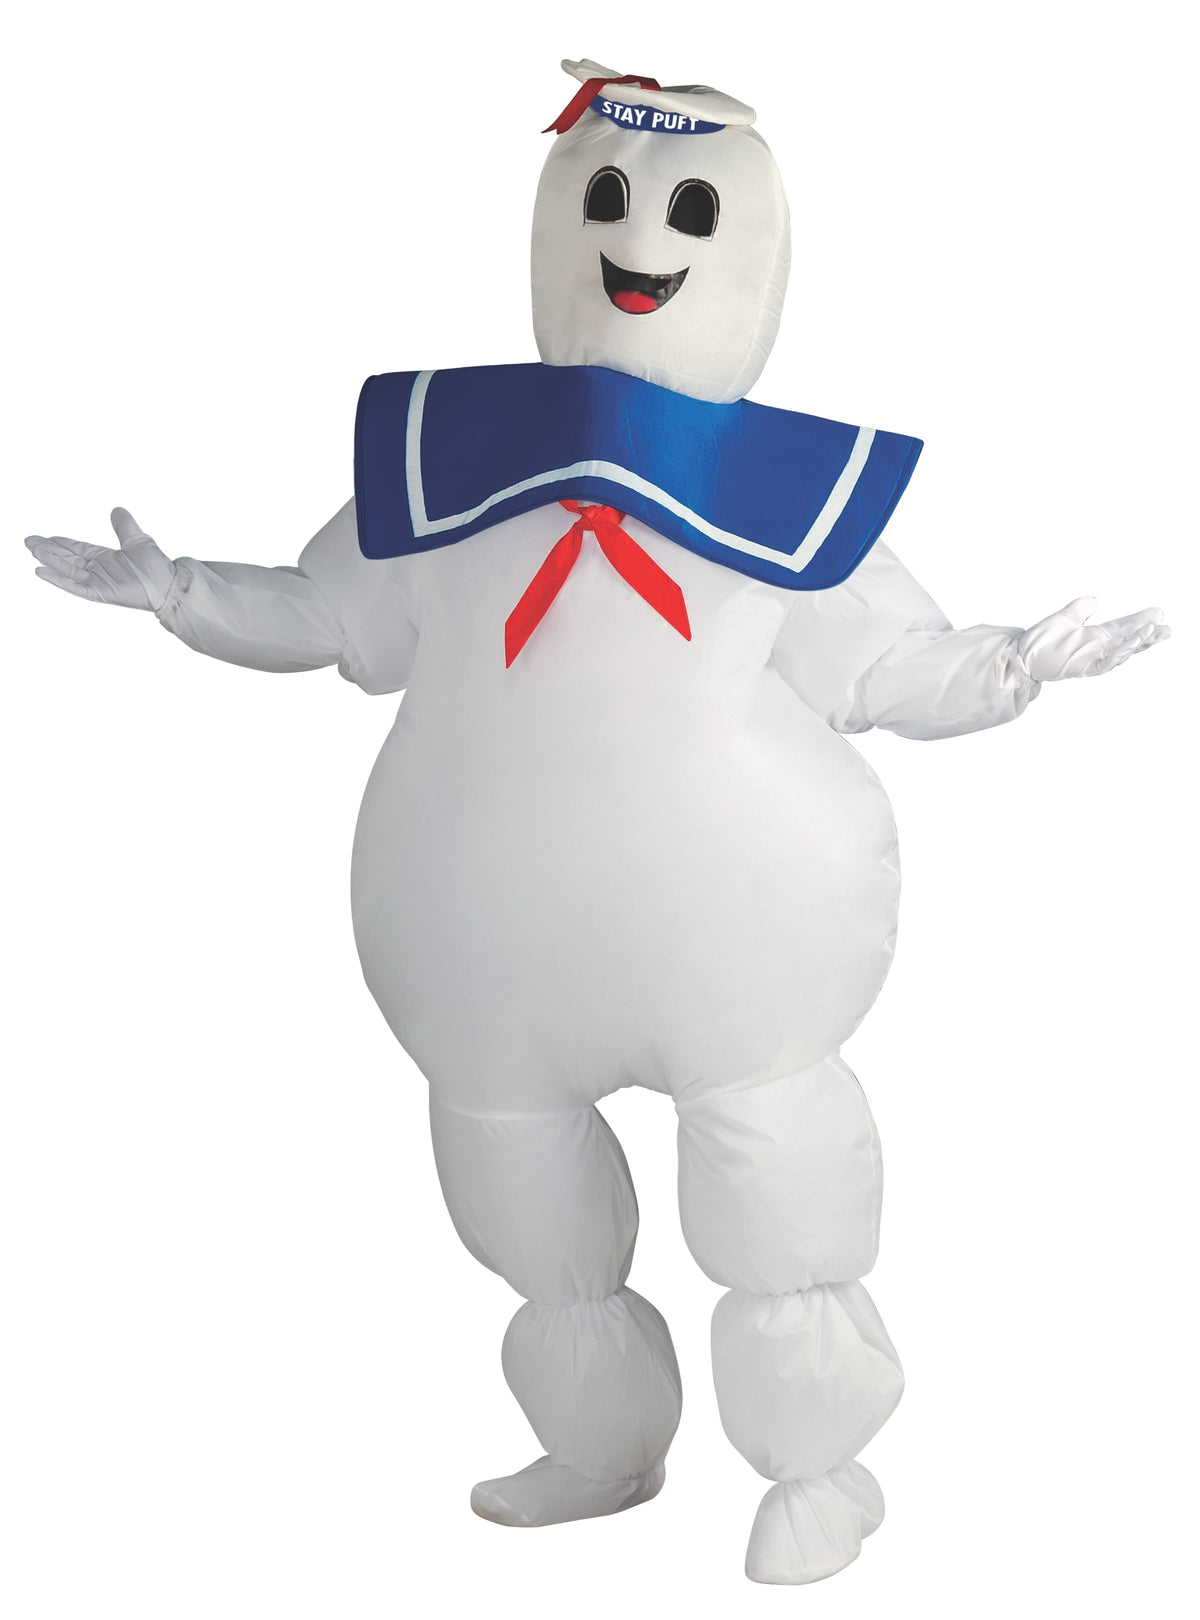 STAY PUFT MARSHMALLOW MAN INFLATABLE COSTUME - STD